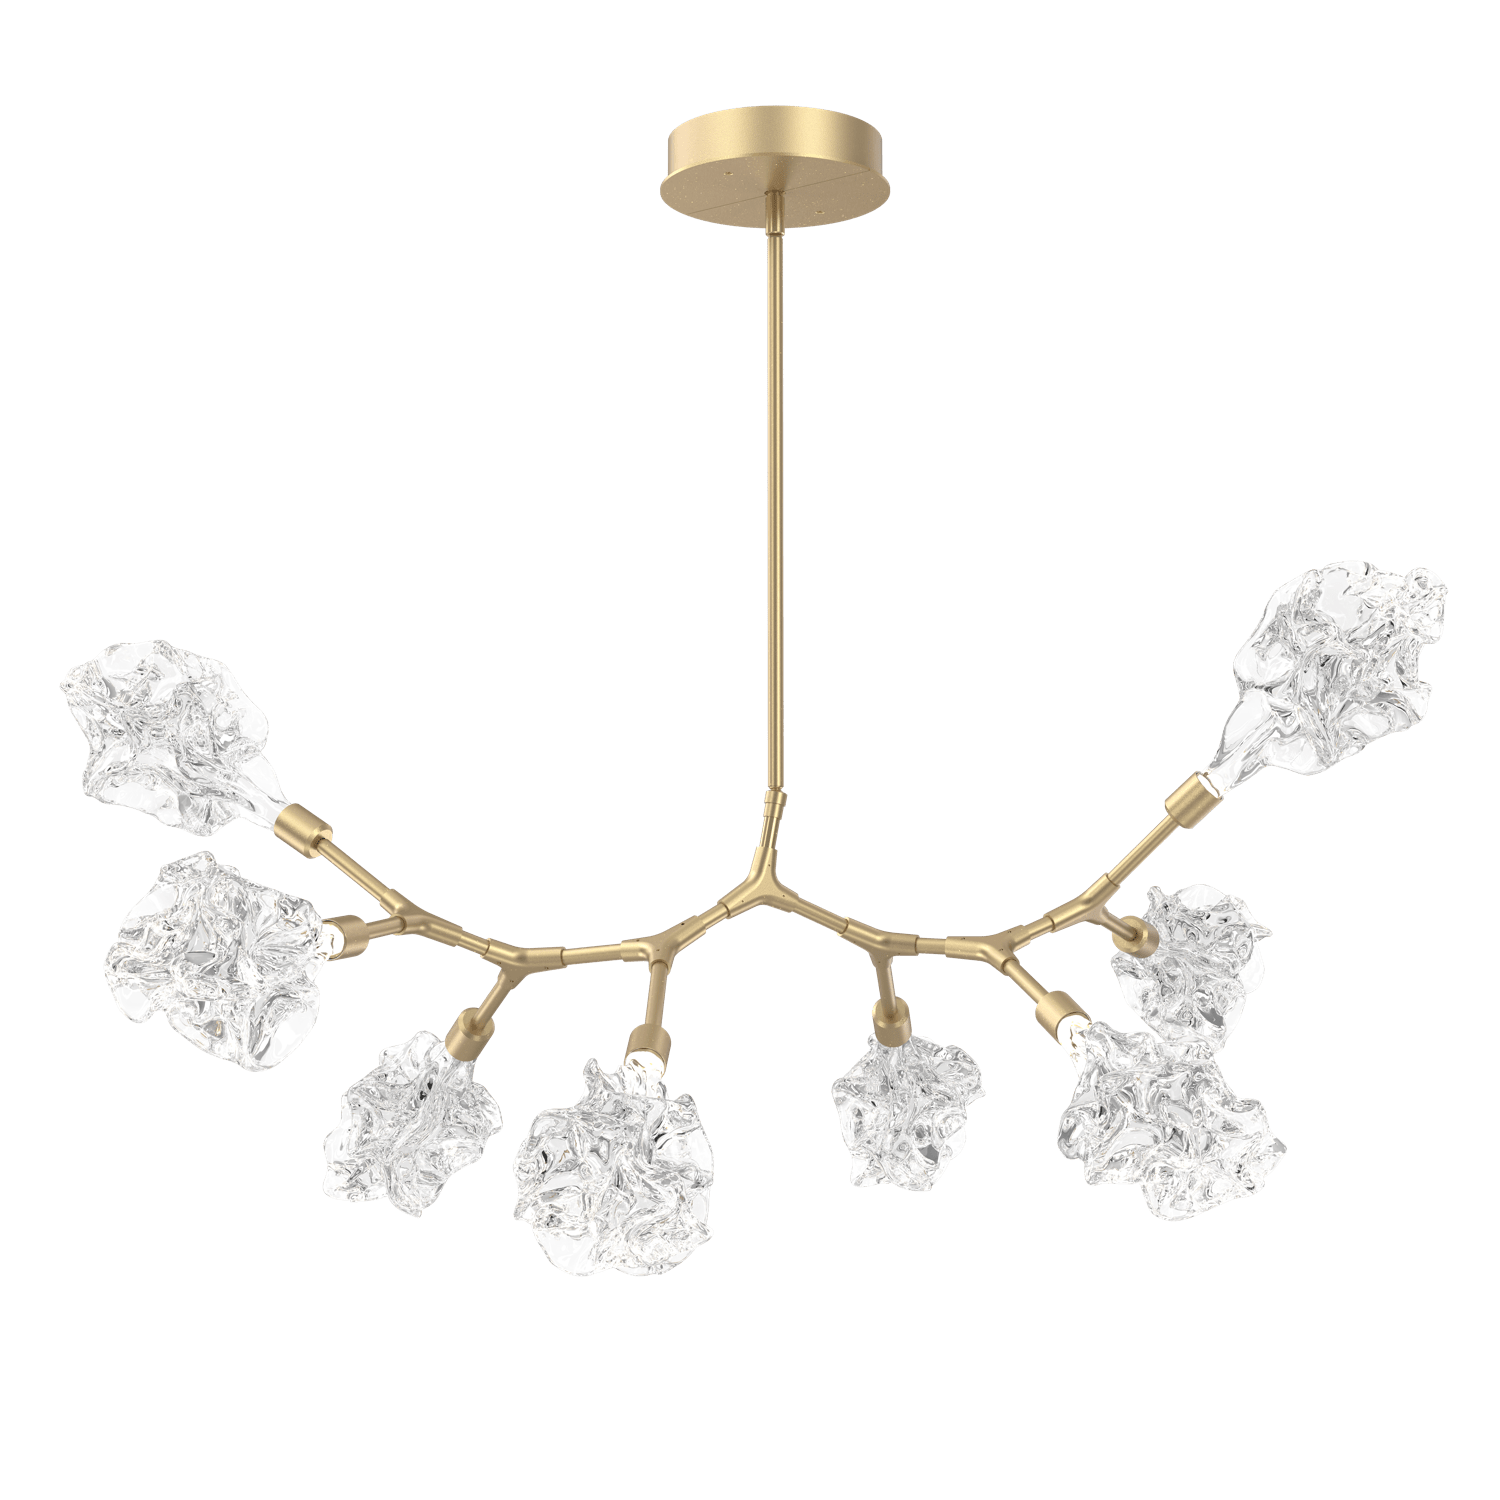 PLB0059-BB-GB-Hammerton-Studio-Blossom-8-light-organic-branch-chandelier-with-gilded-brass-finish-and-clear-handblown-crystal-glass-shades-and-LED-lamping